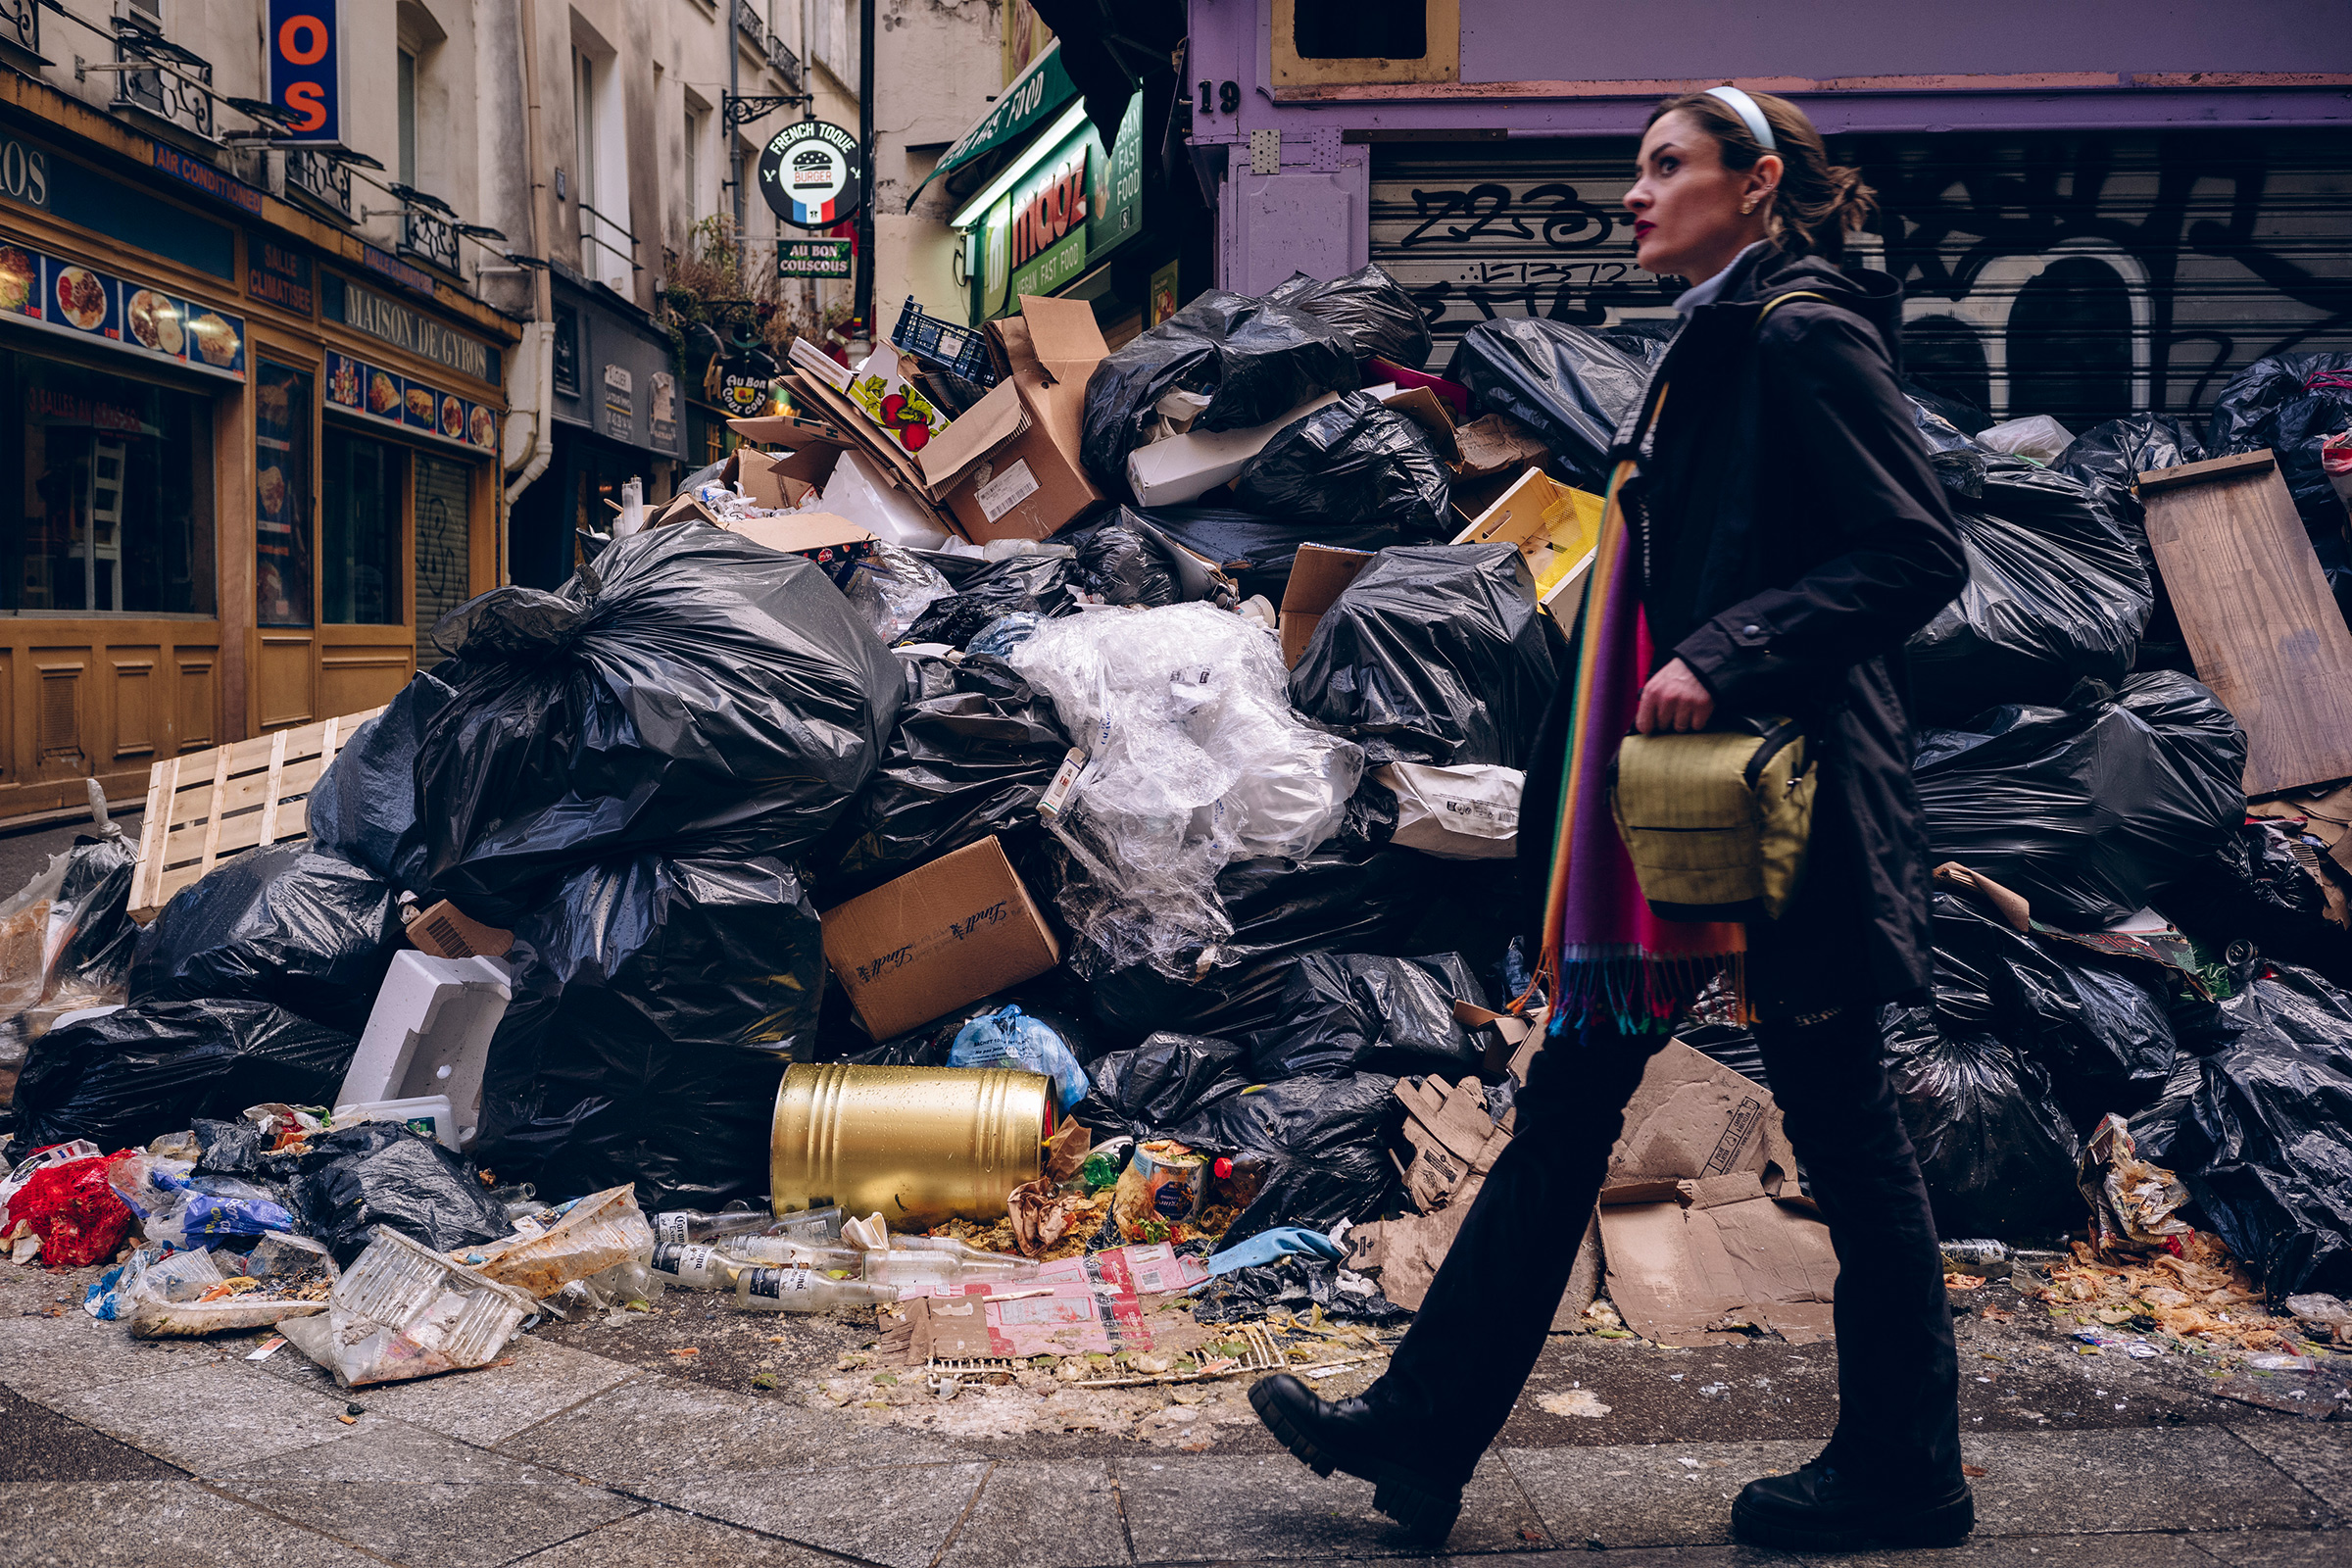 Accumulation of rubbish in the streets of the capital, on the ninth day of the garbage collectors strike against the pension reform, on March 14. (Marie Magnin—Hans Lucas/Redux)